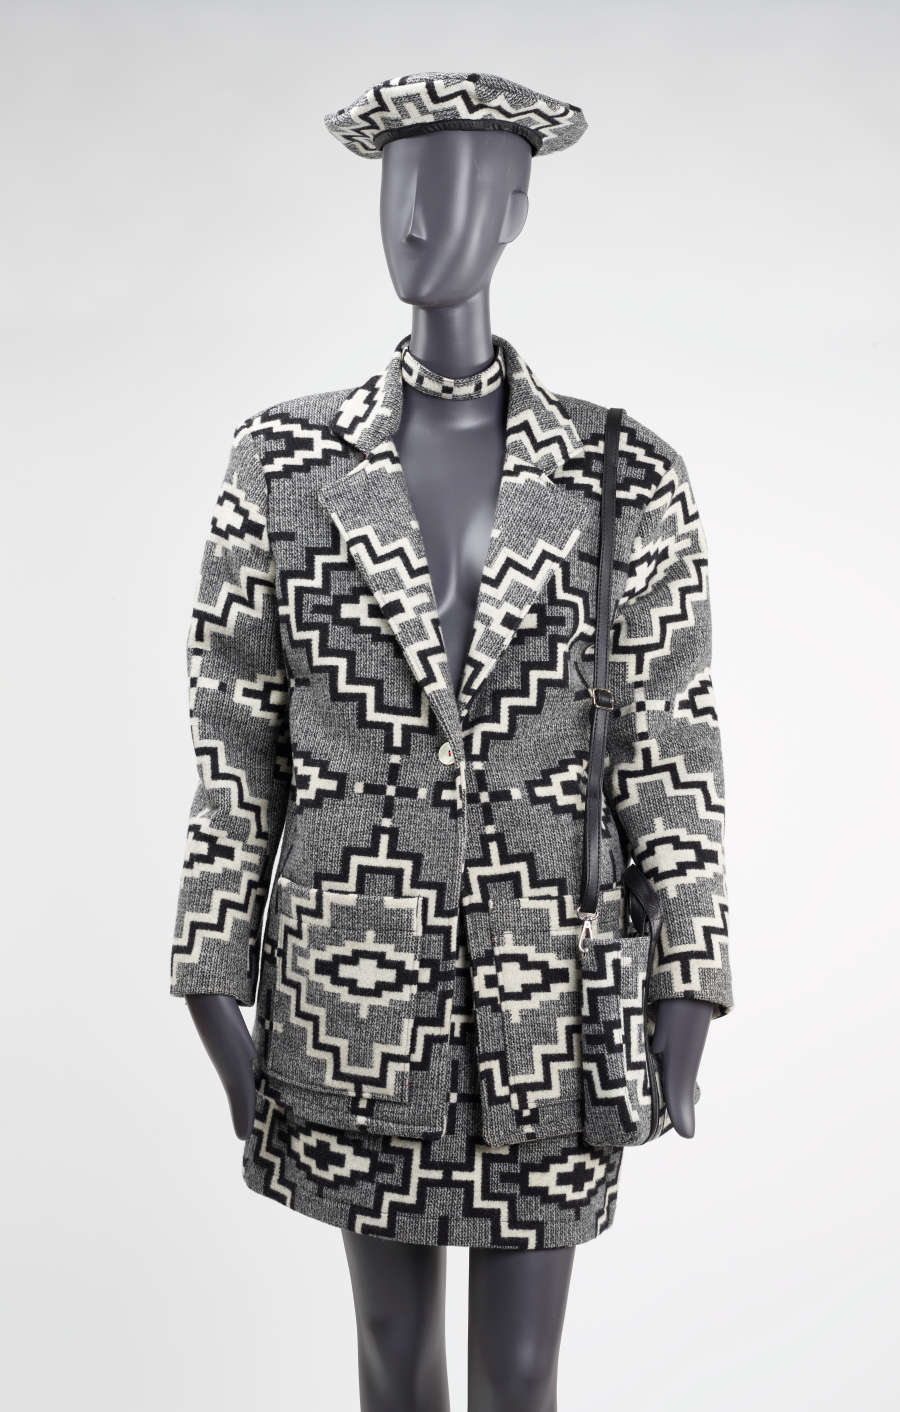 Mannequin dressed in a gray tweed black and white geometric patterned blazer with a matching hat, choker and bag. The skirt rests above the knee, and blazer reveals mannequin's chest.